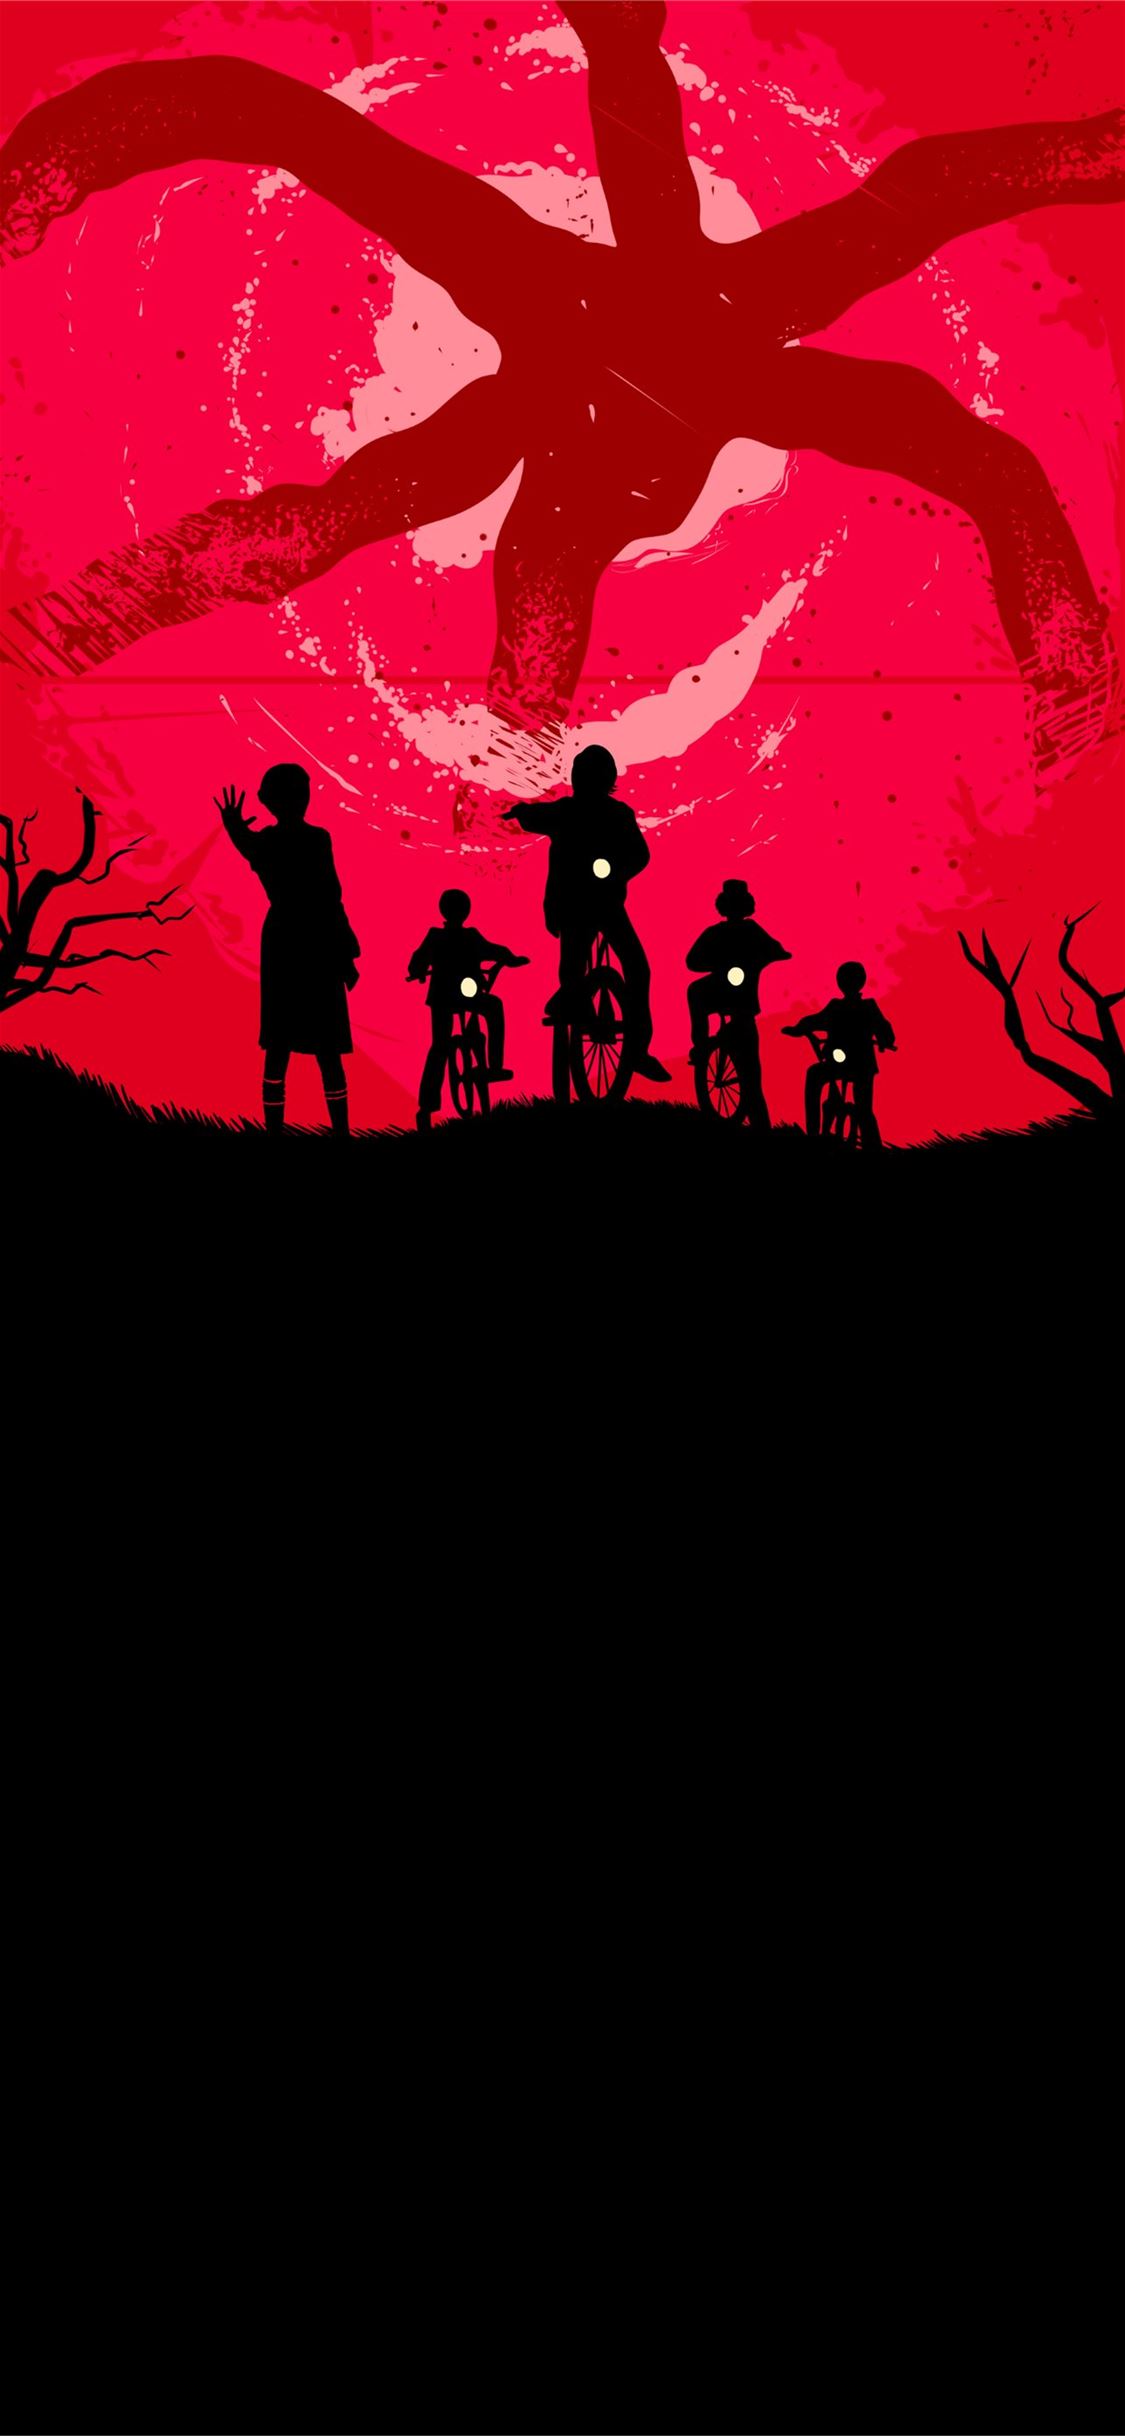 Stranger Things Amoledbackgrounds iPhone Wallpapers Free Download